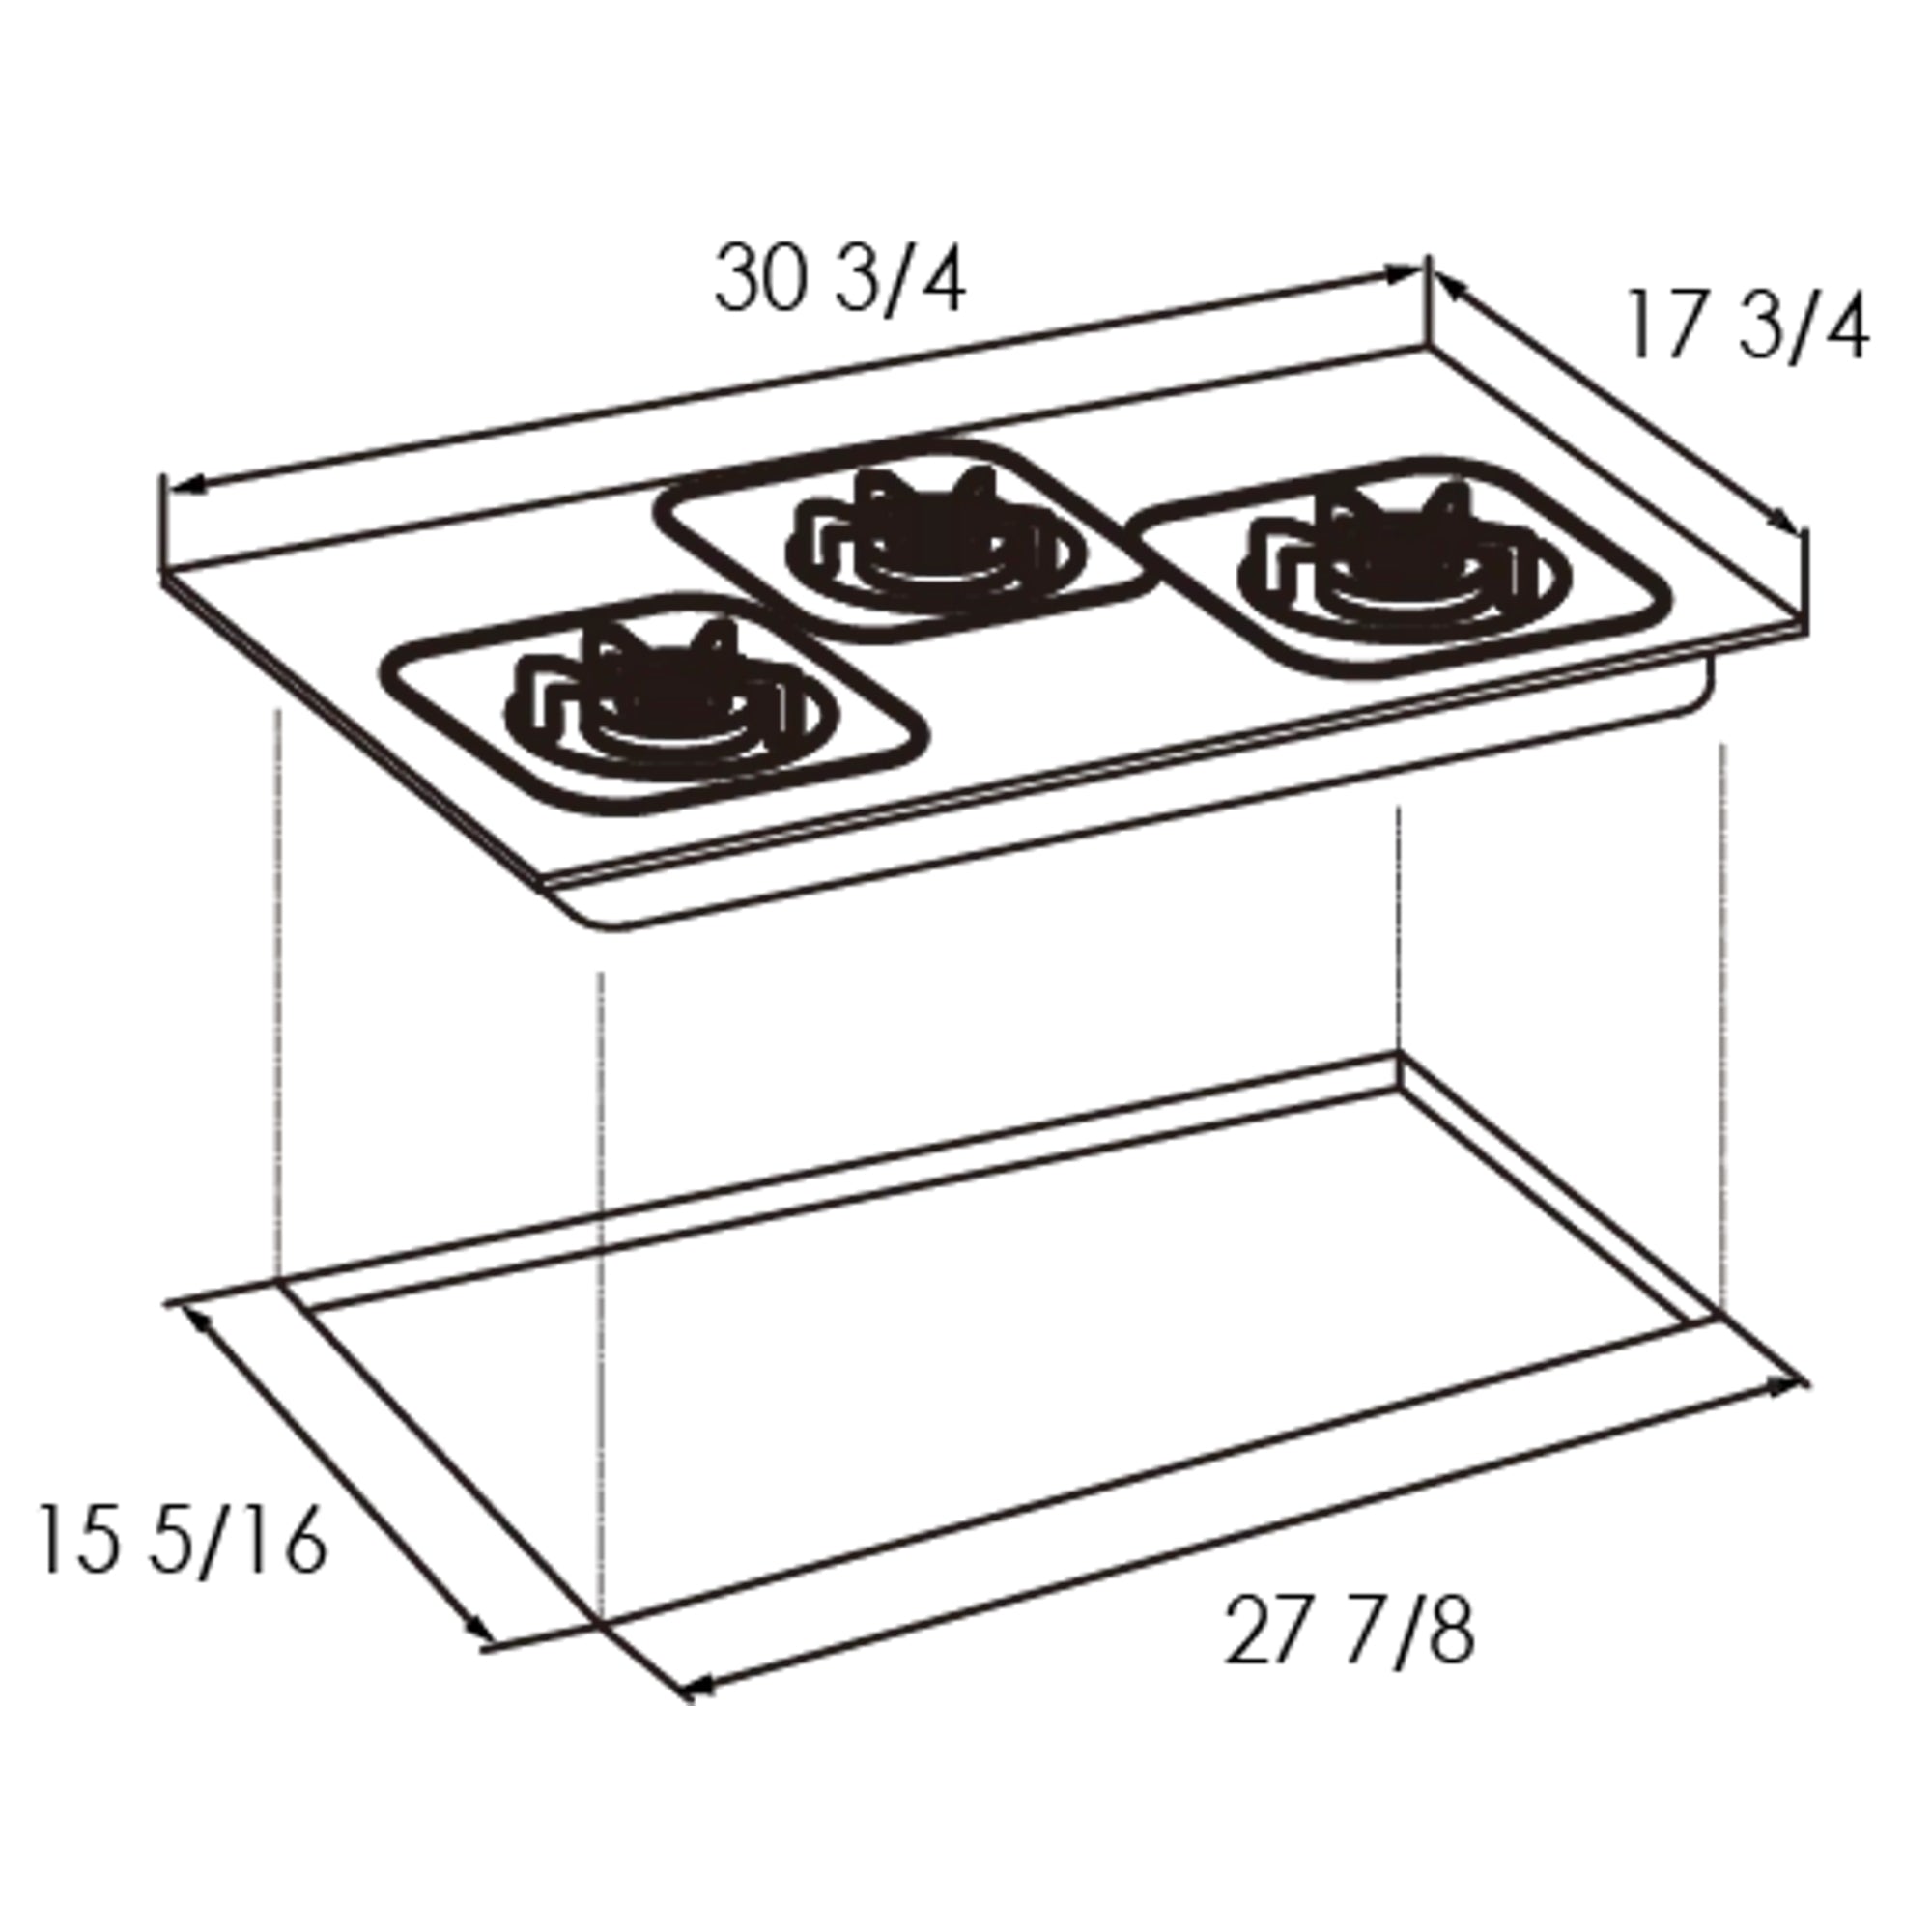 Cooktop Sizes